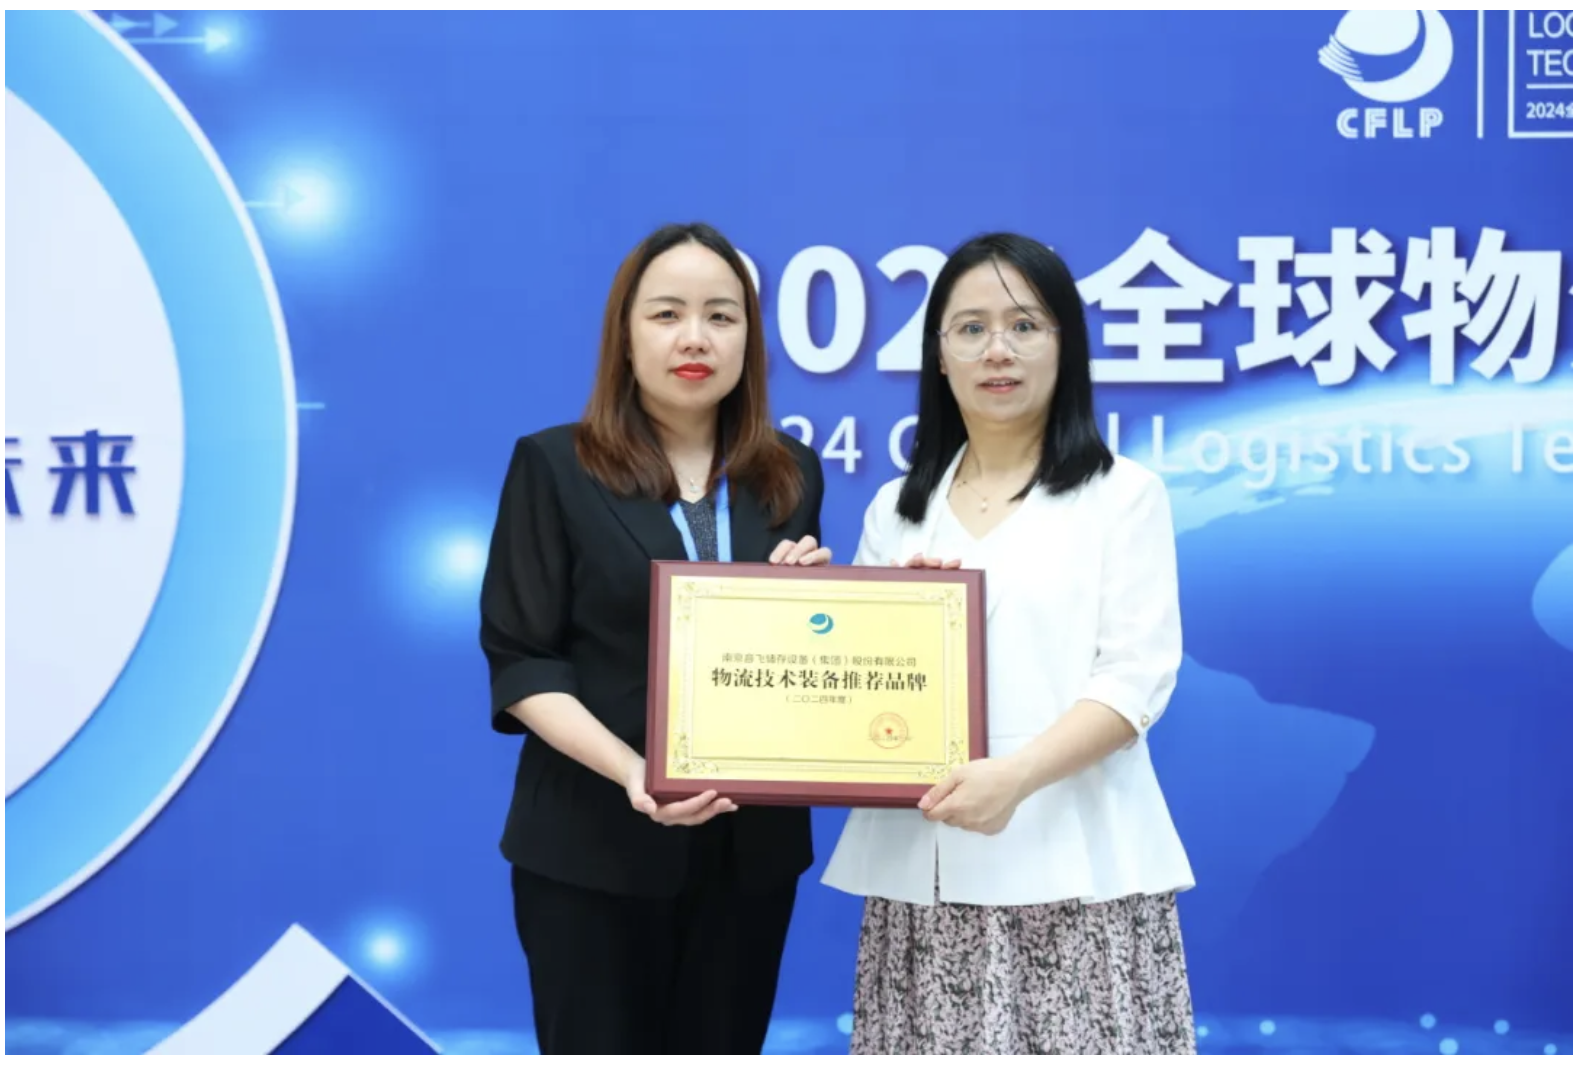 Inform Storage Participates in the 2024 Global Logistics Technology Conference and Wins the Recommended Brand Award for Logistics Technology Equipment